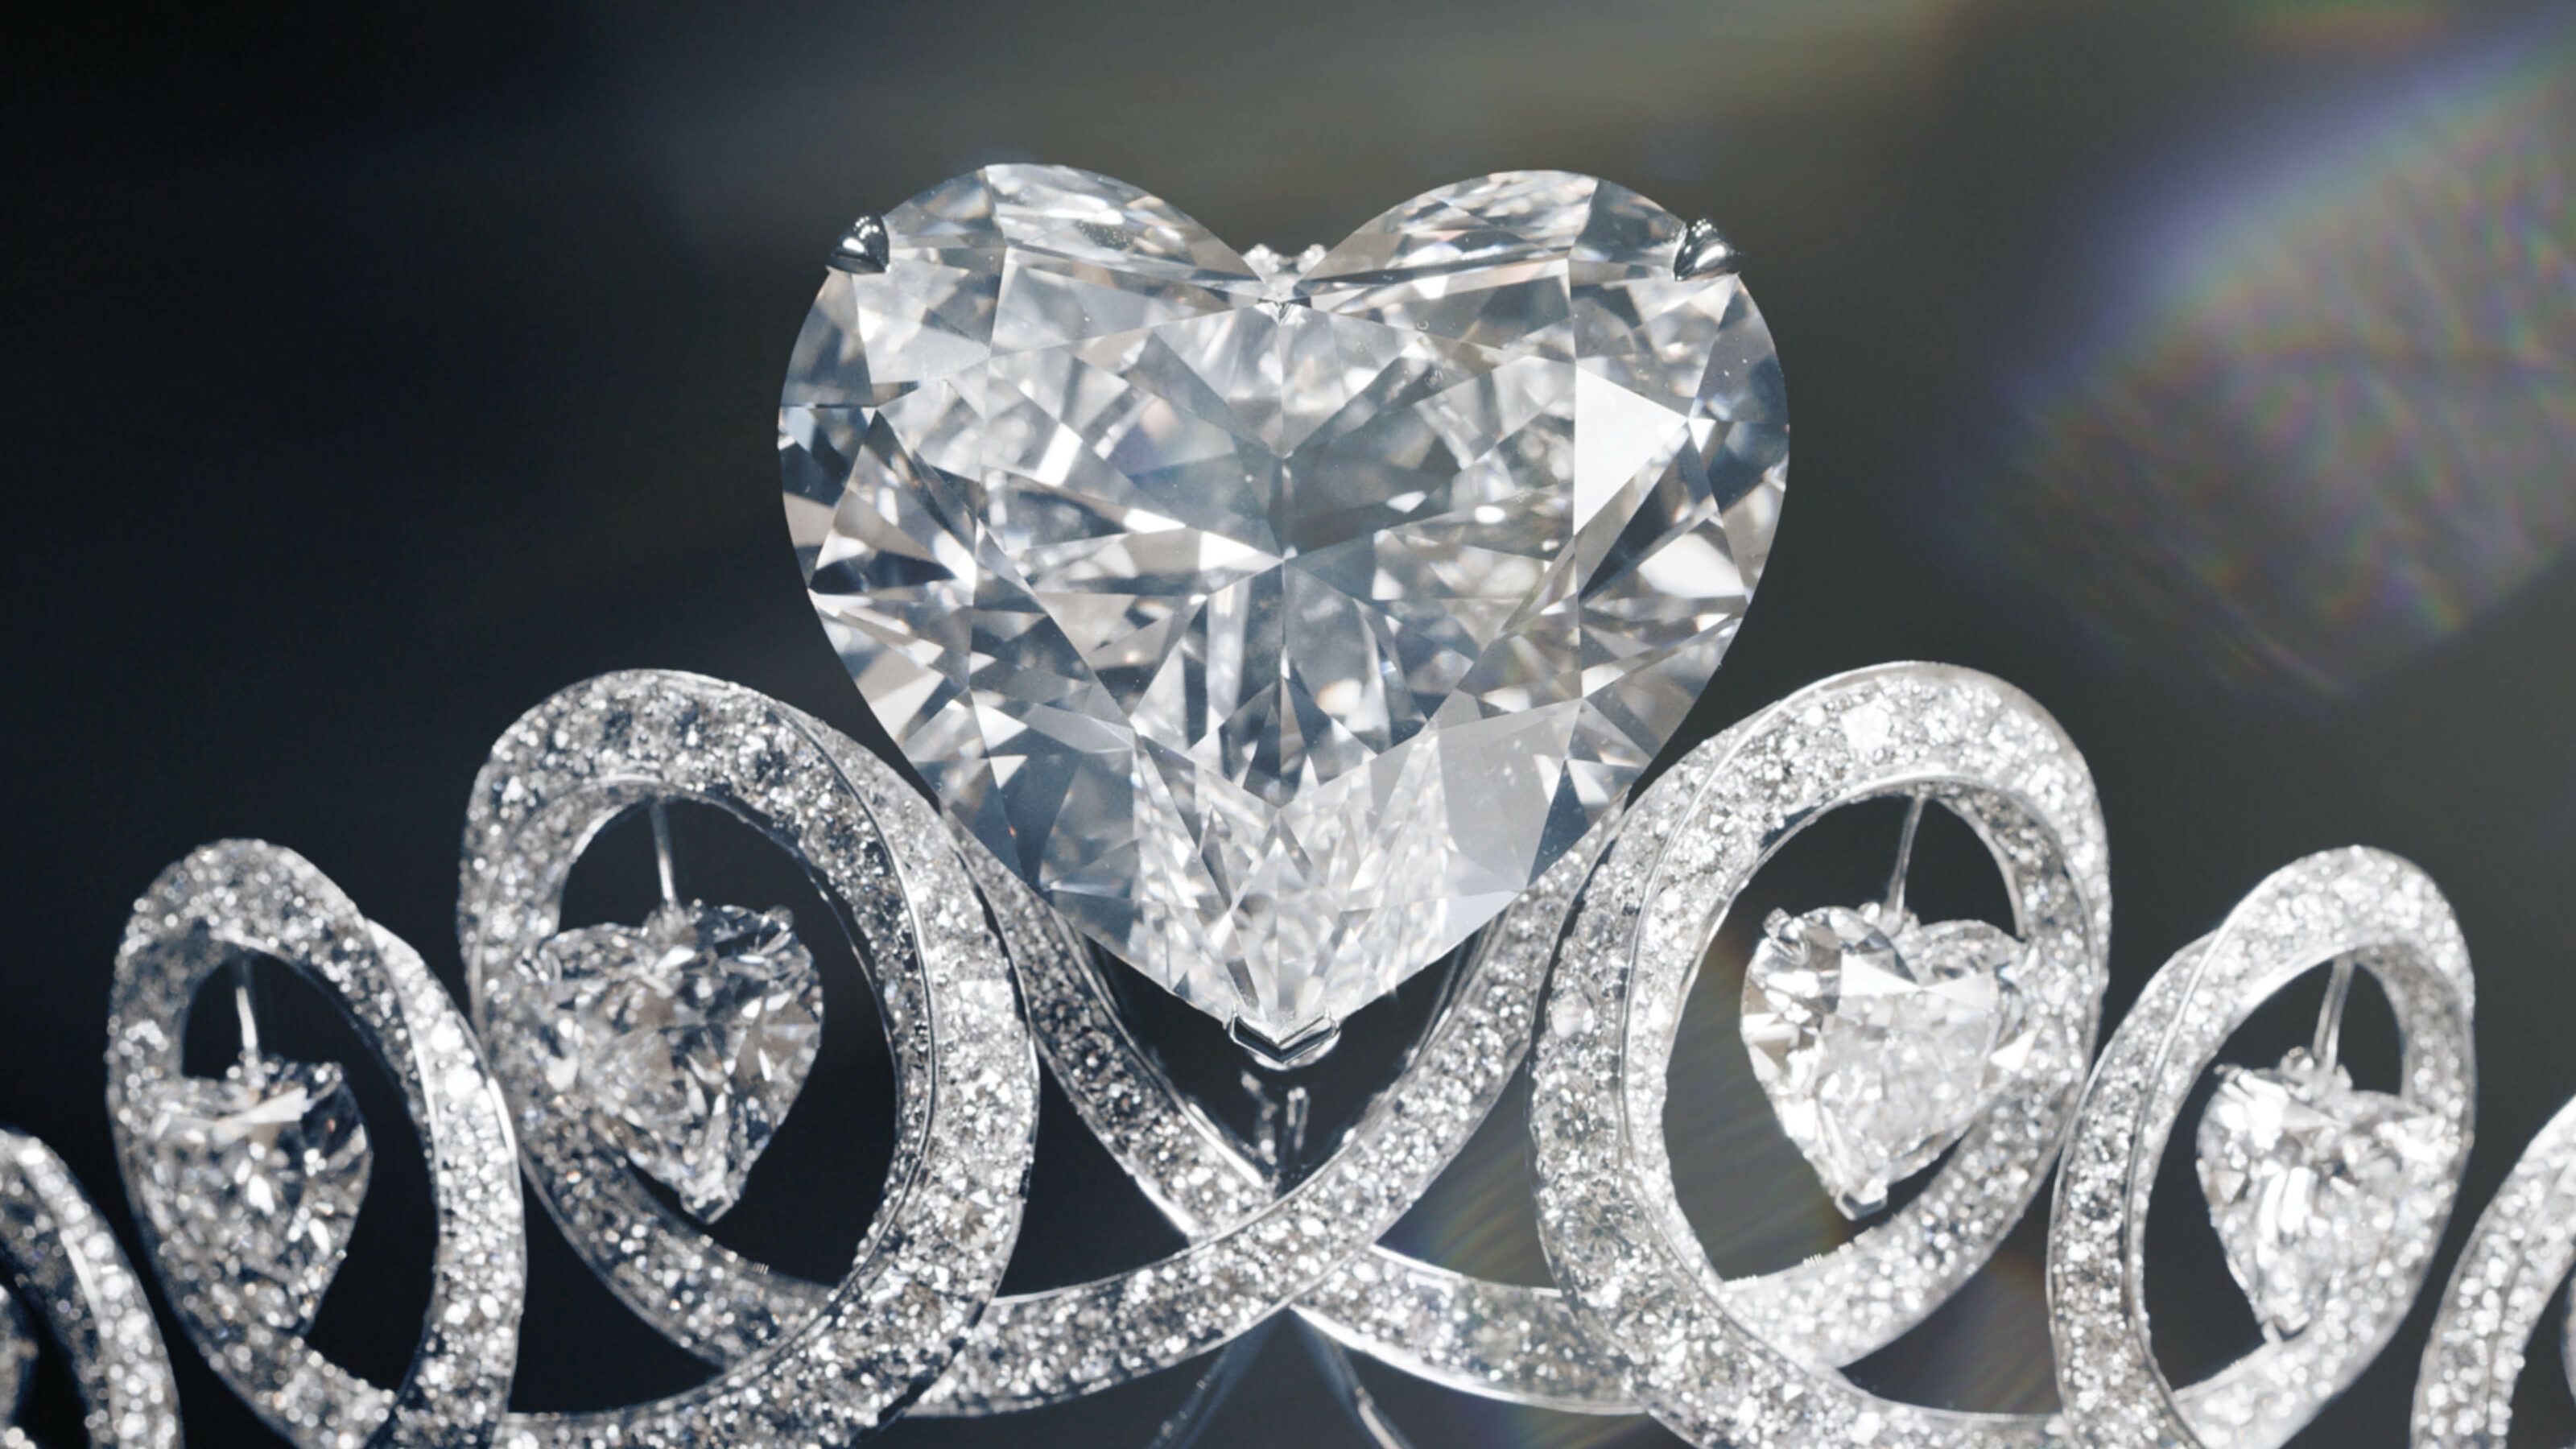 What Makes Graff Diamond Jewelry So Special? - Only Natural Diamonds